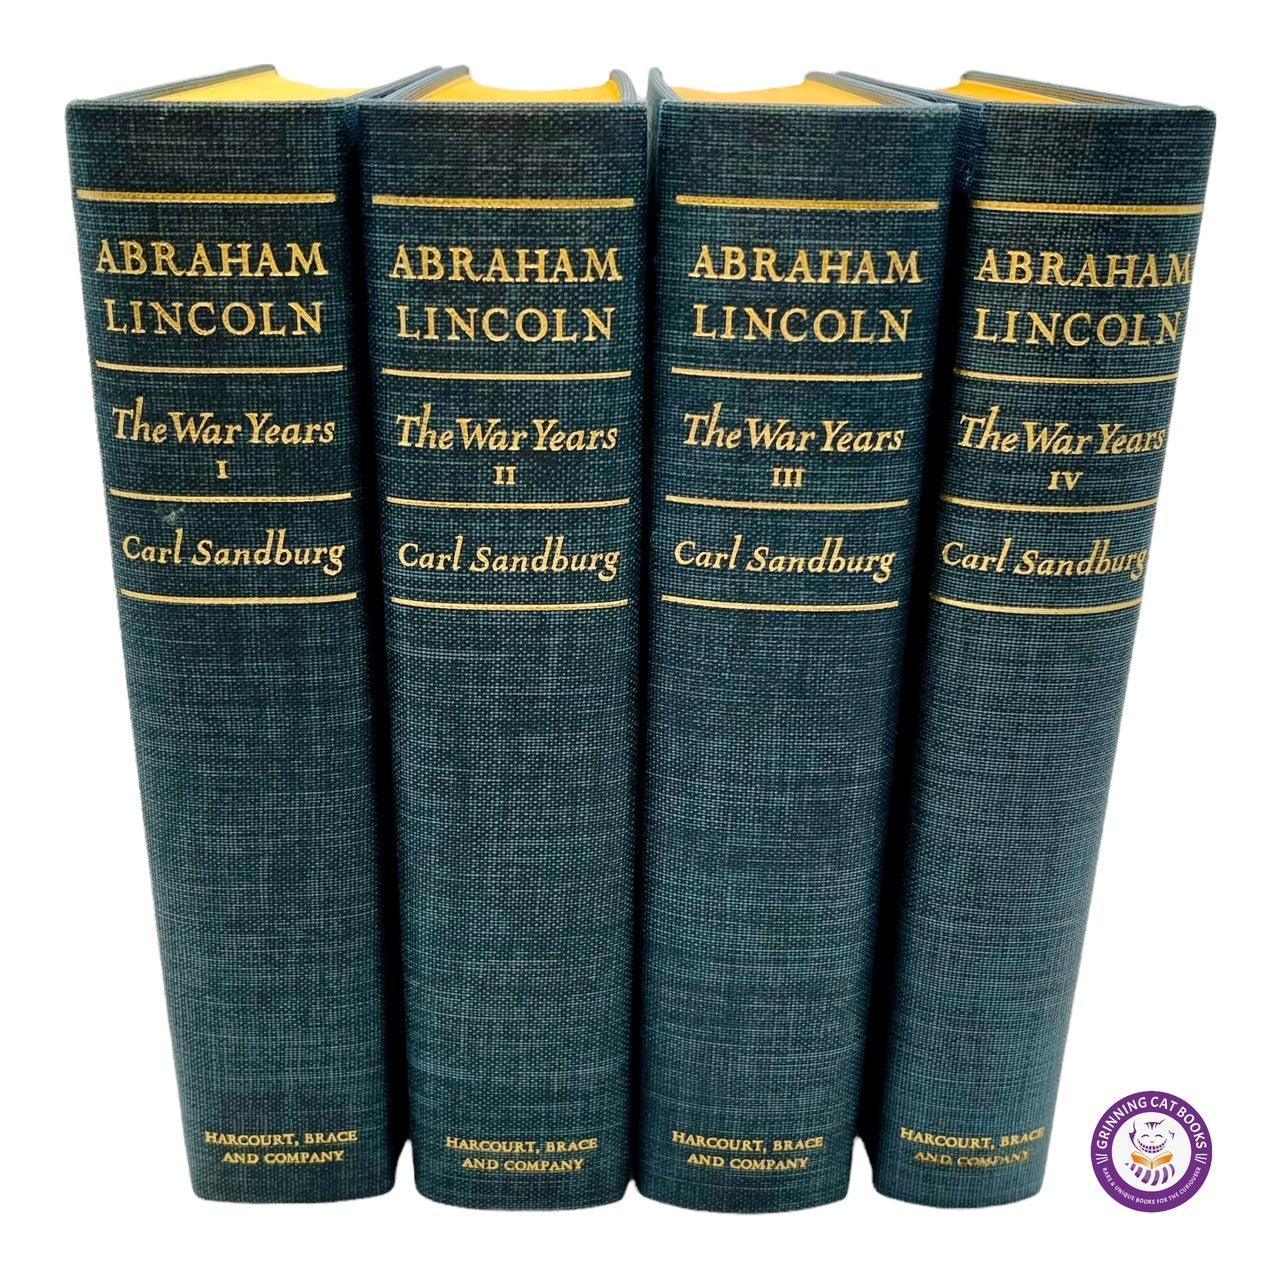 Abraham Lincoln: The Prairie Years and The War Years - Grinning Cat Books - AMERICANA - AMERICAN HISTORY, HISTORY, PULITZER PRIZE